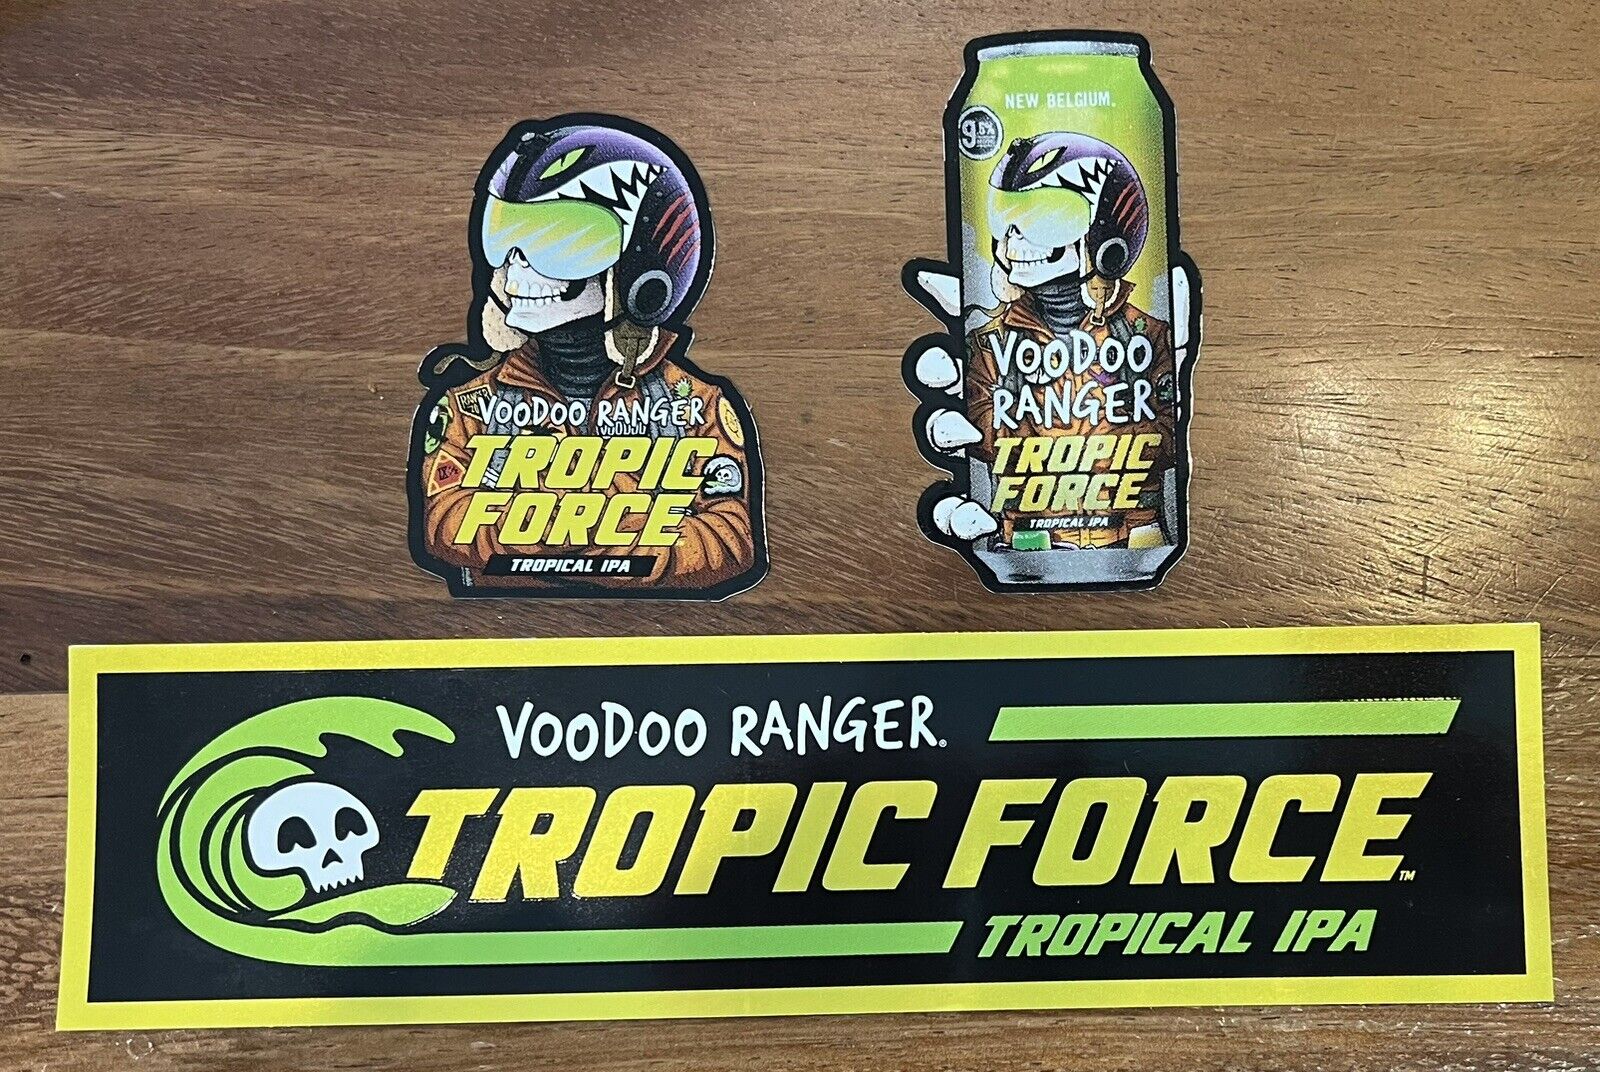 Set of 3 Voodoo Ranger Tropic Force Tropical IPA Foil Stickers - NEW